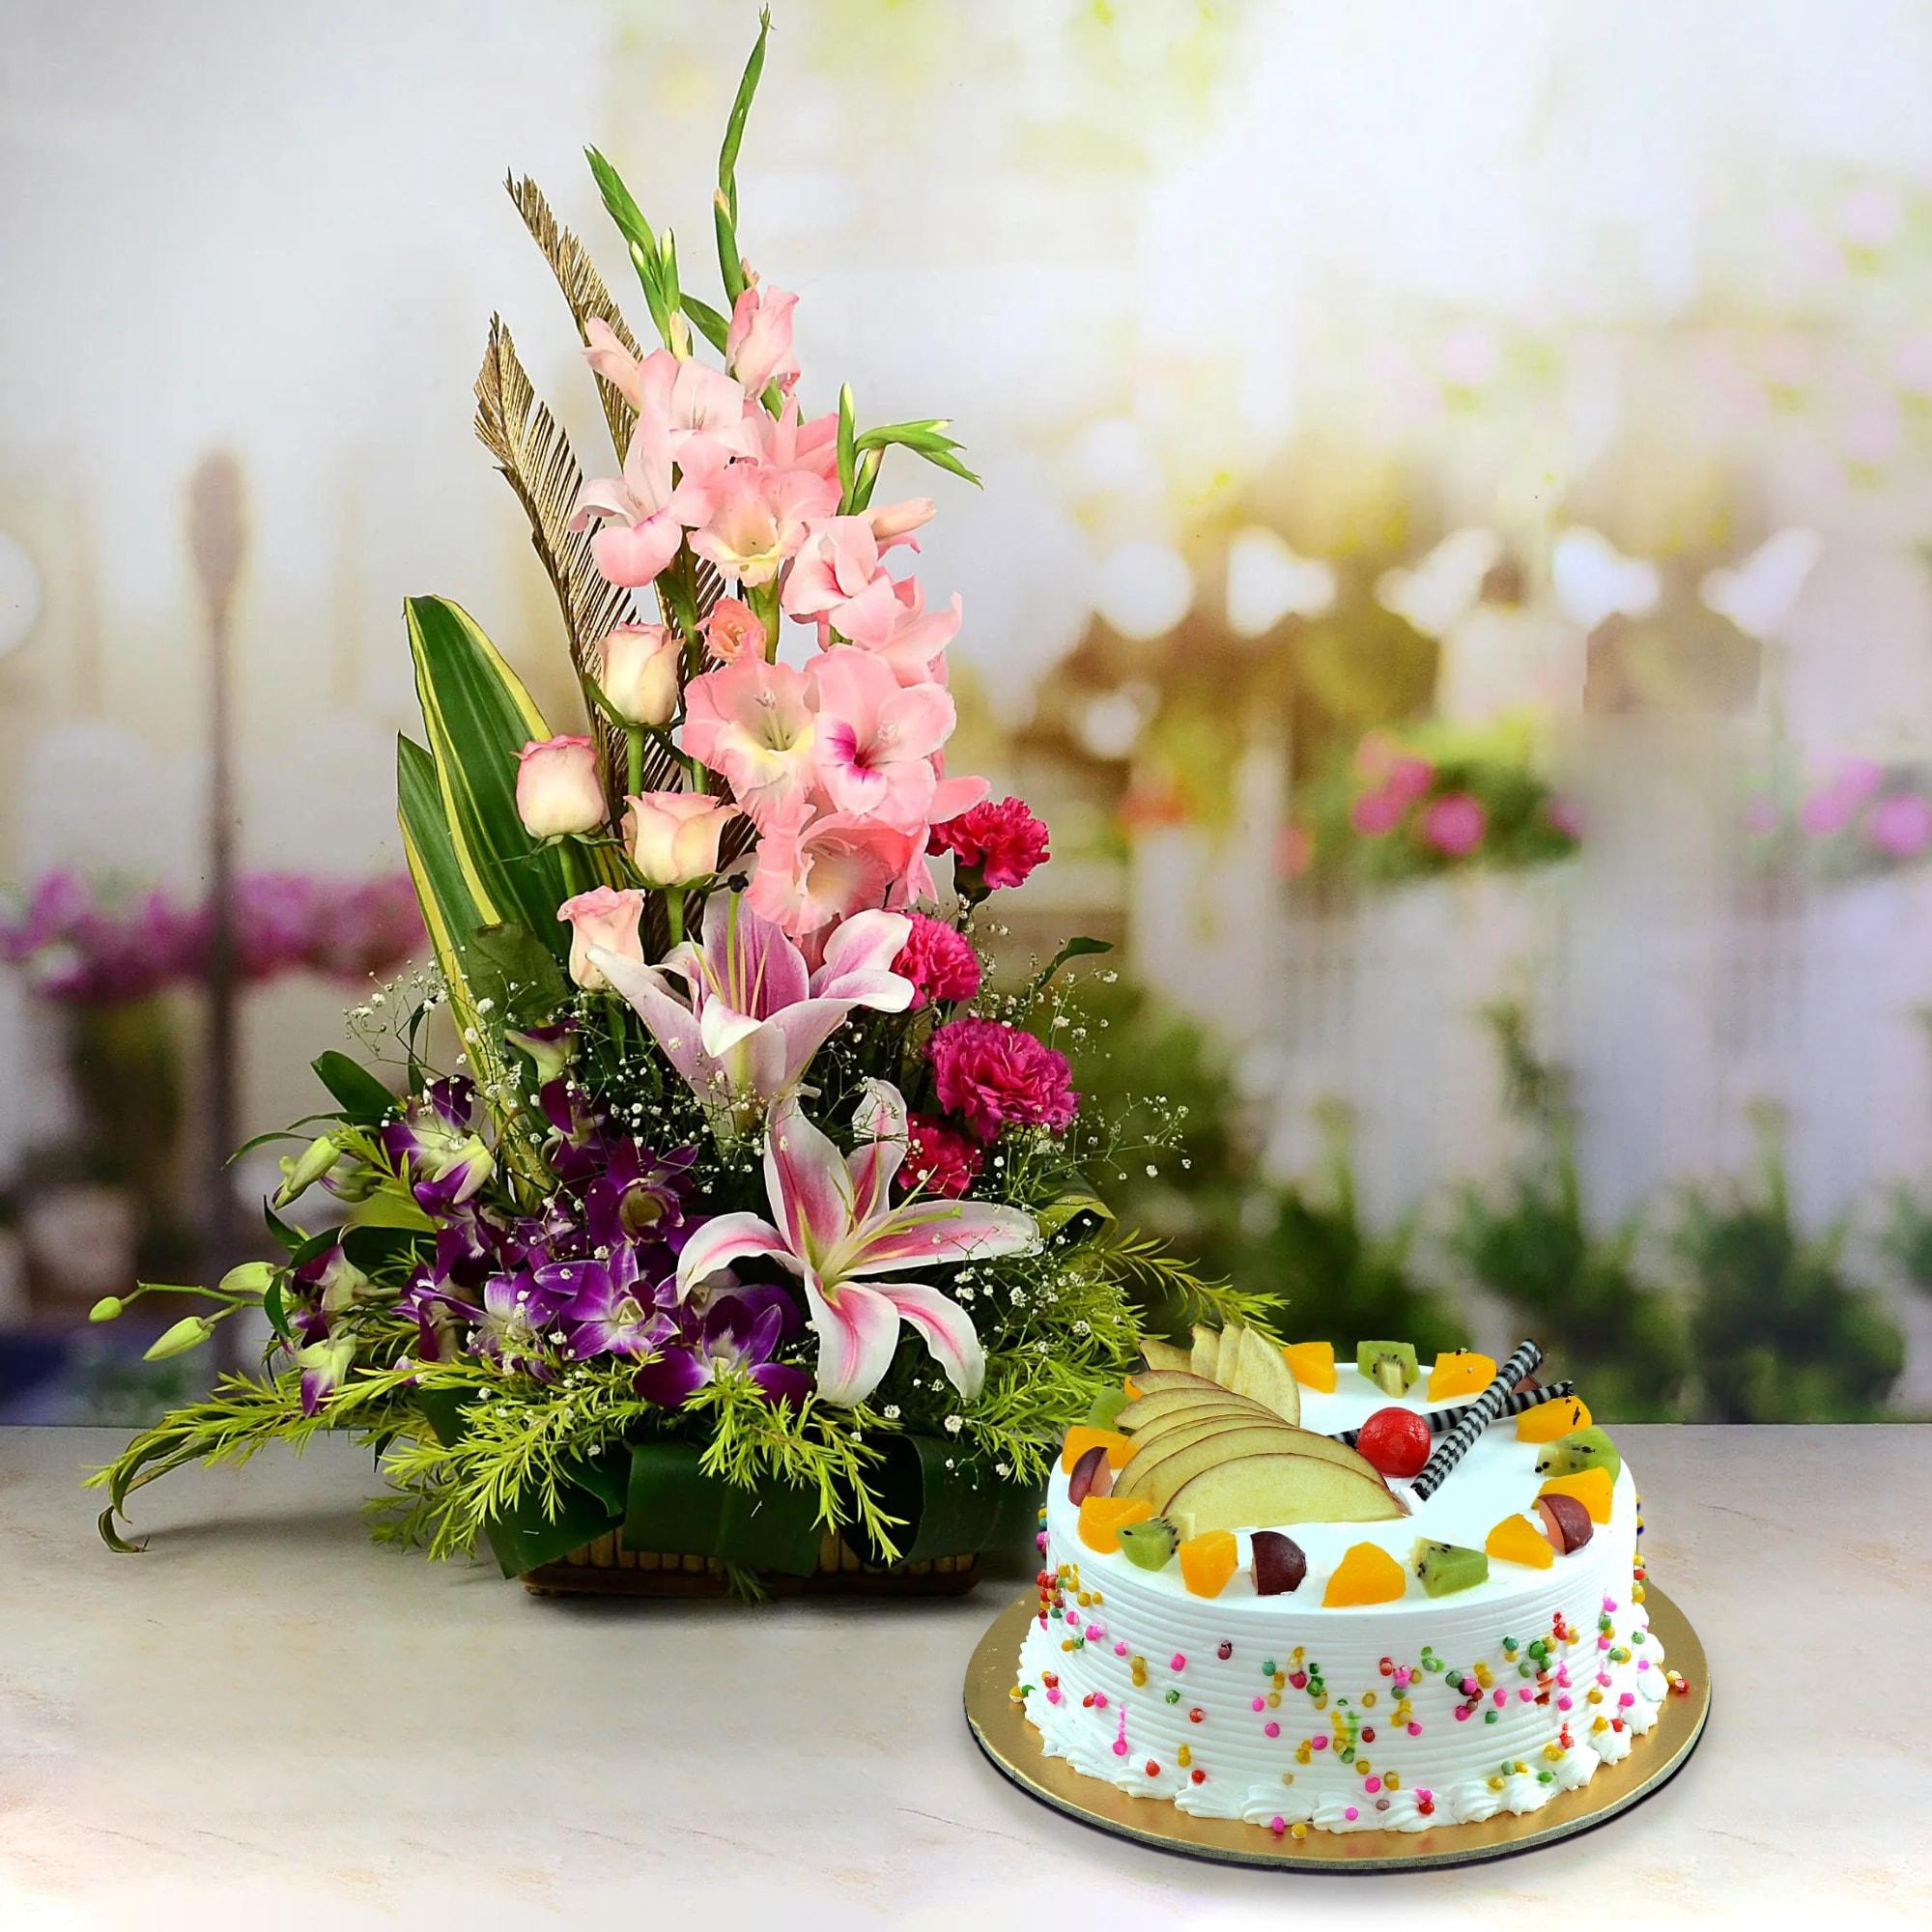 Share 84+ online cake and flower delivery latest - in.daotaonec